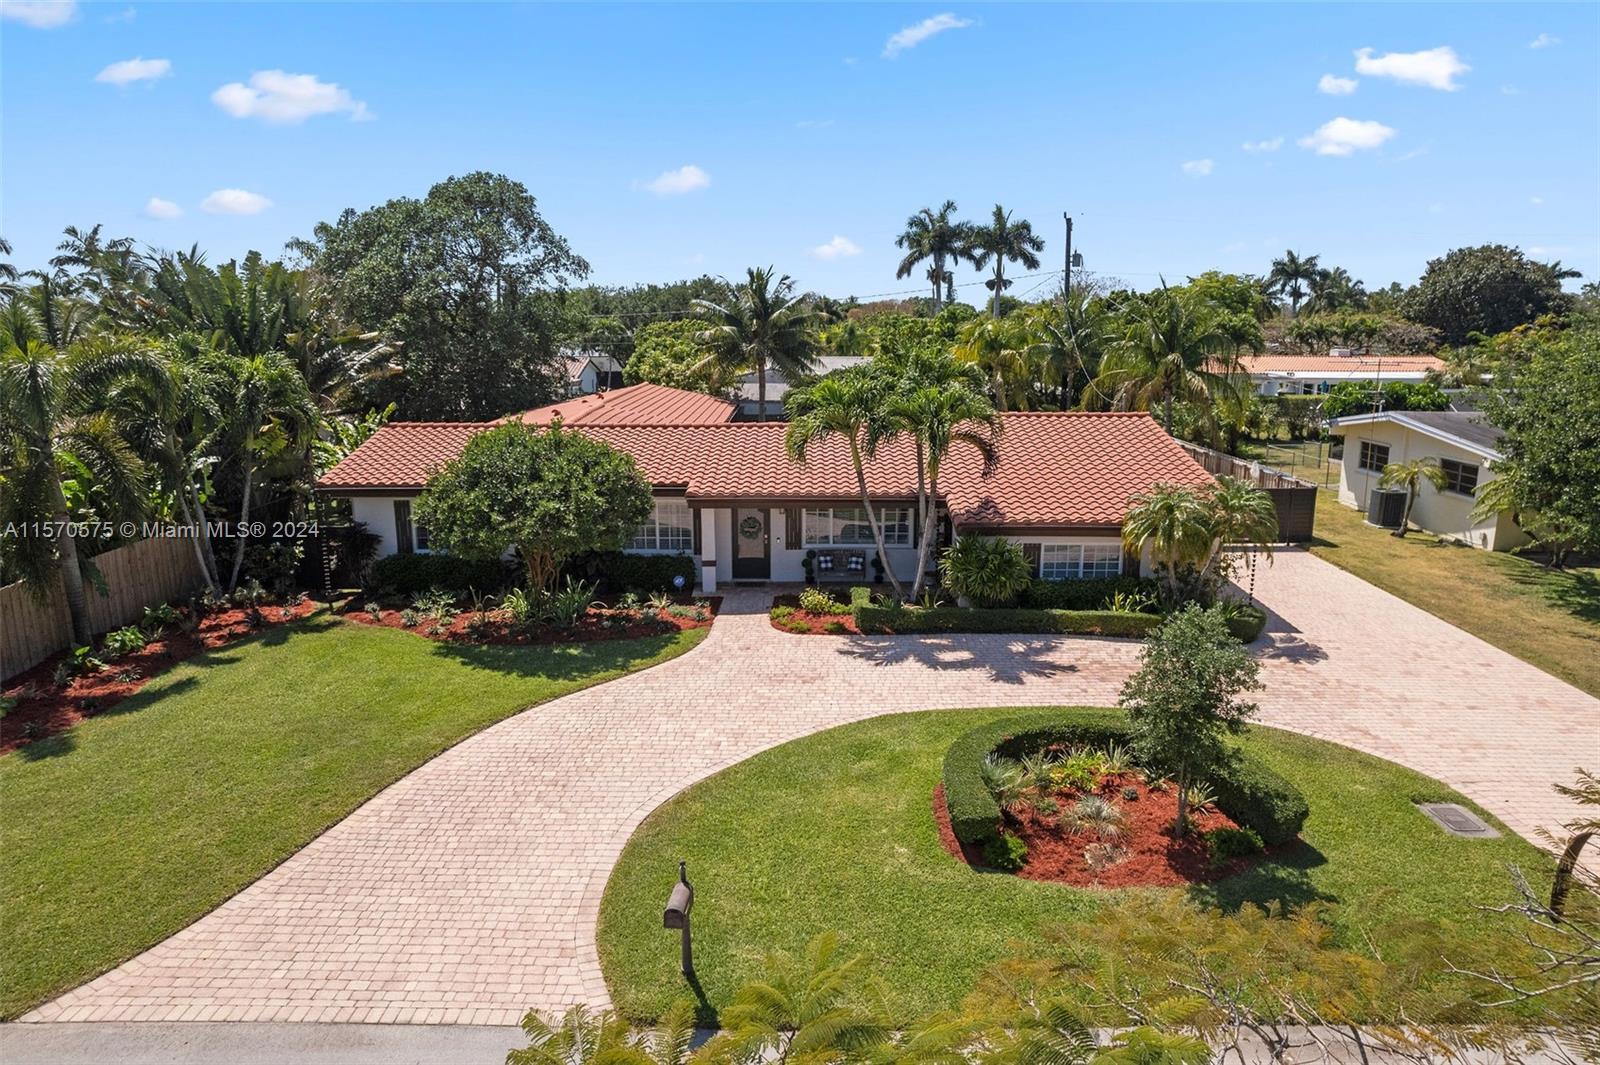 Fantastic home in the ever-desirable Palmetto Bay.  This beautiful one-story residence features 5 be